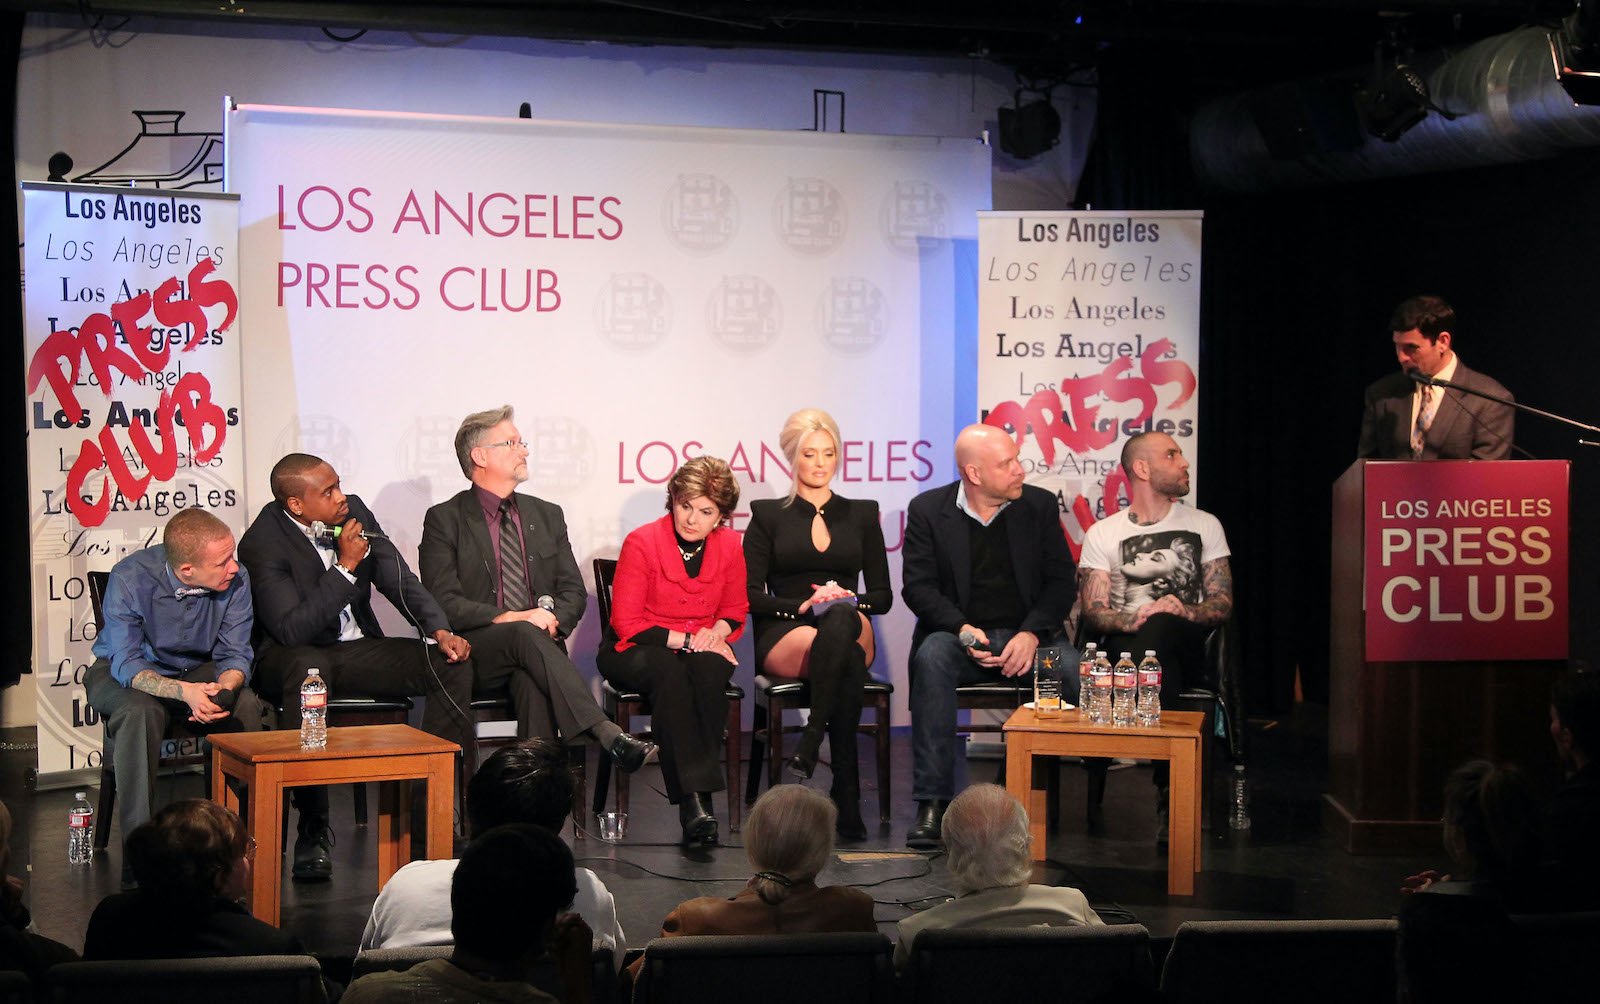 The Tom Girardi case shocked Gloria Allred. She's seen here with Erika Jayne honoring by LGBTs In The News at Los Angeles Press Club in 2015